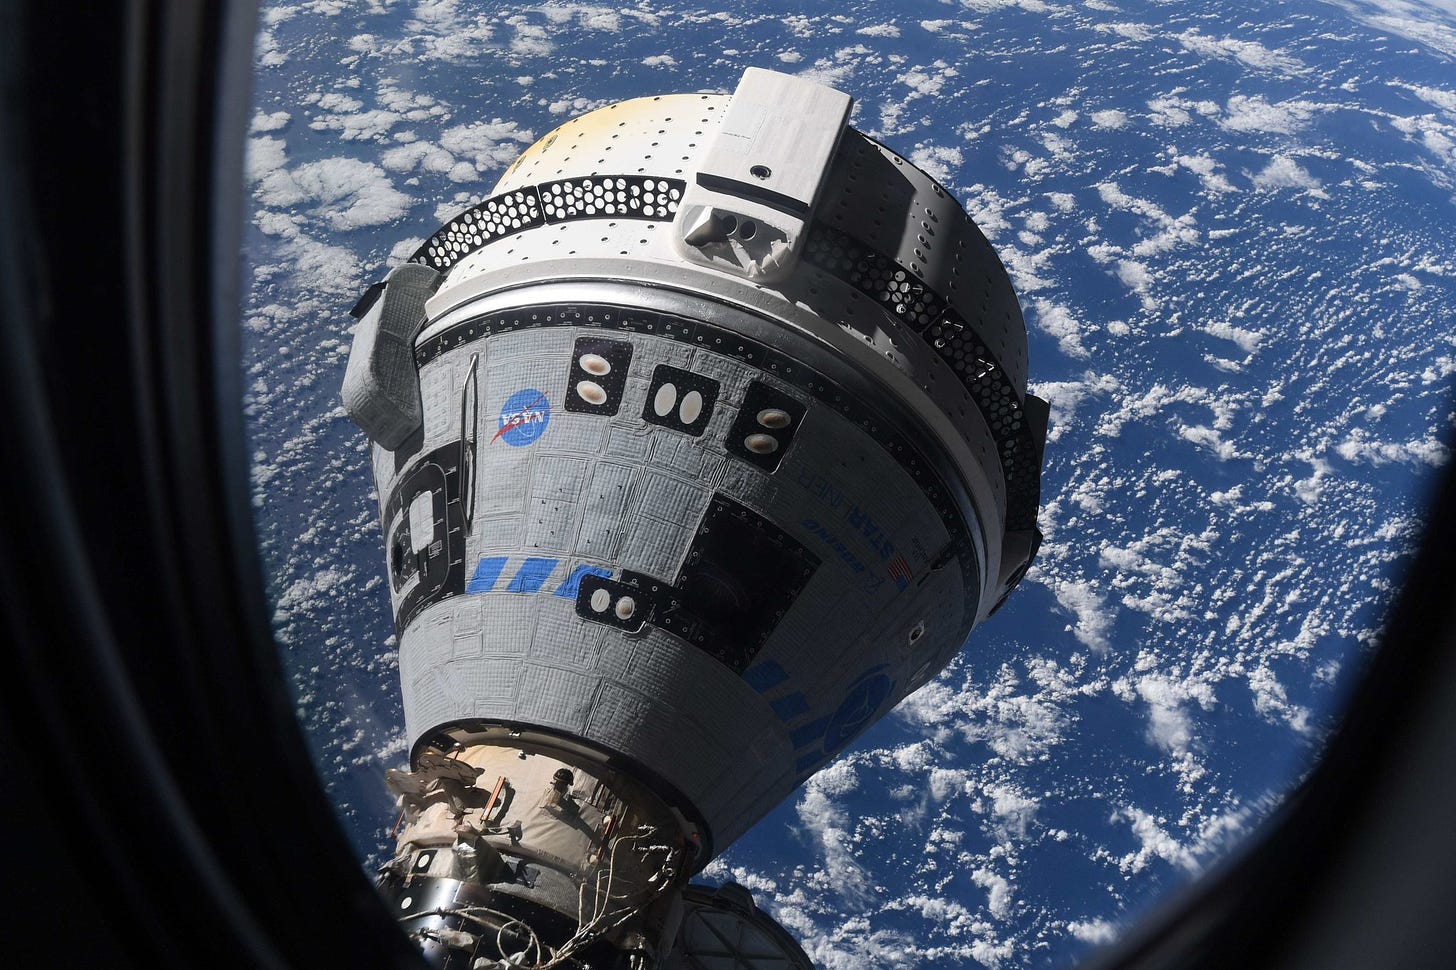 https://boeing-jtti.s3.amazonaws.com/wp-content/uploads/2023/02/13165520/docking_with_earth_in_background_out_window.png